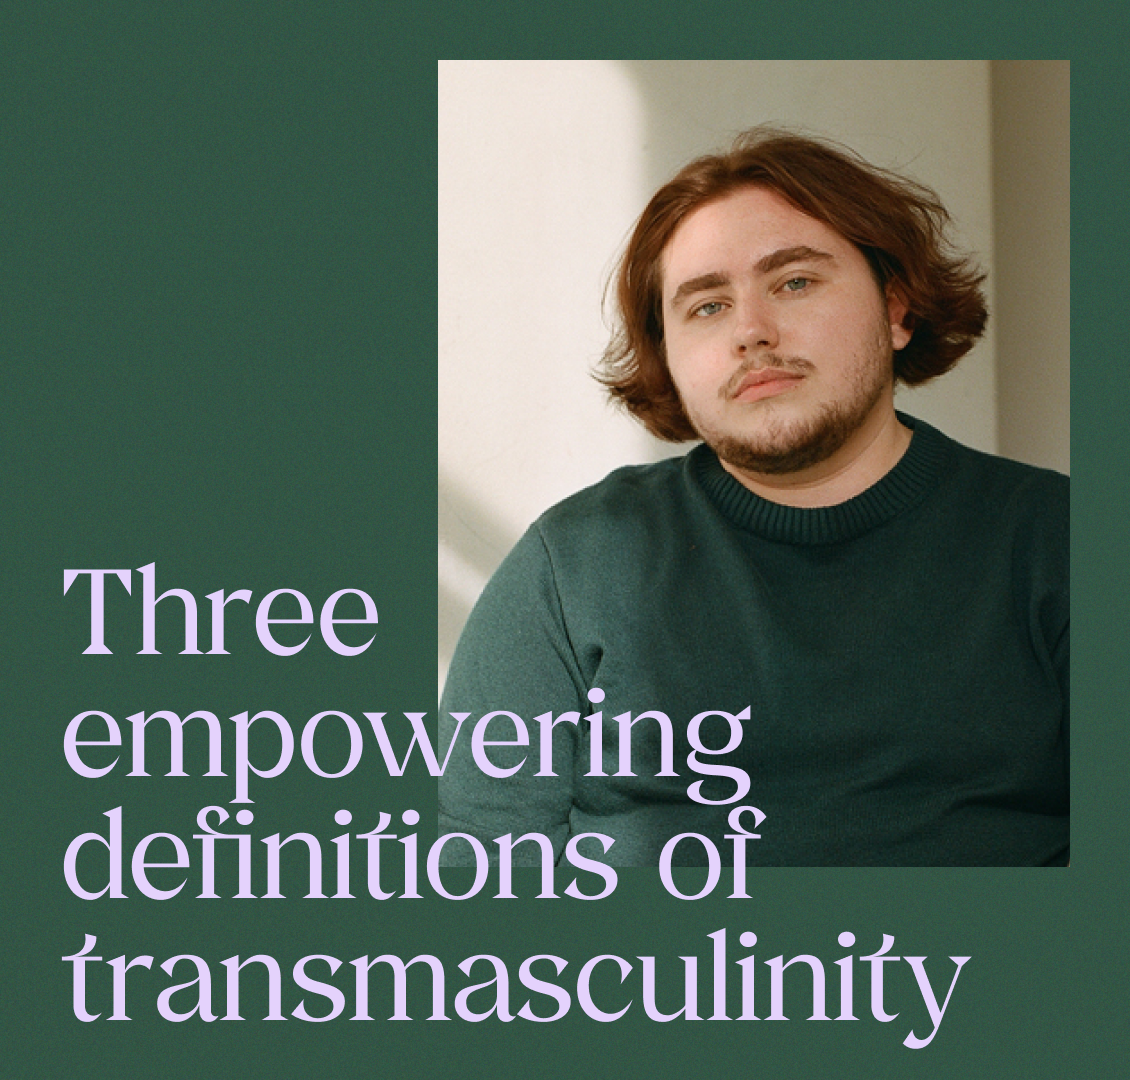 What Does it Mean to be Transmasc?